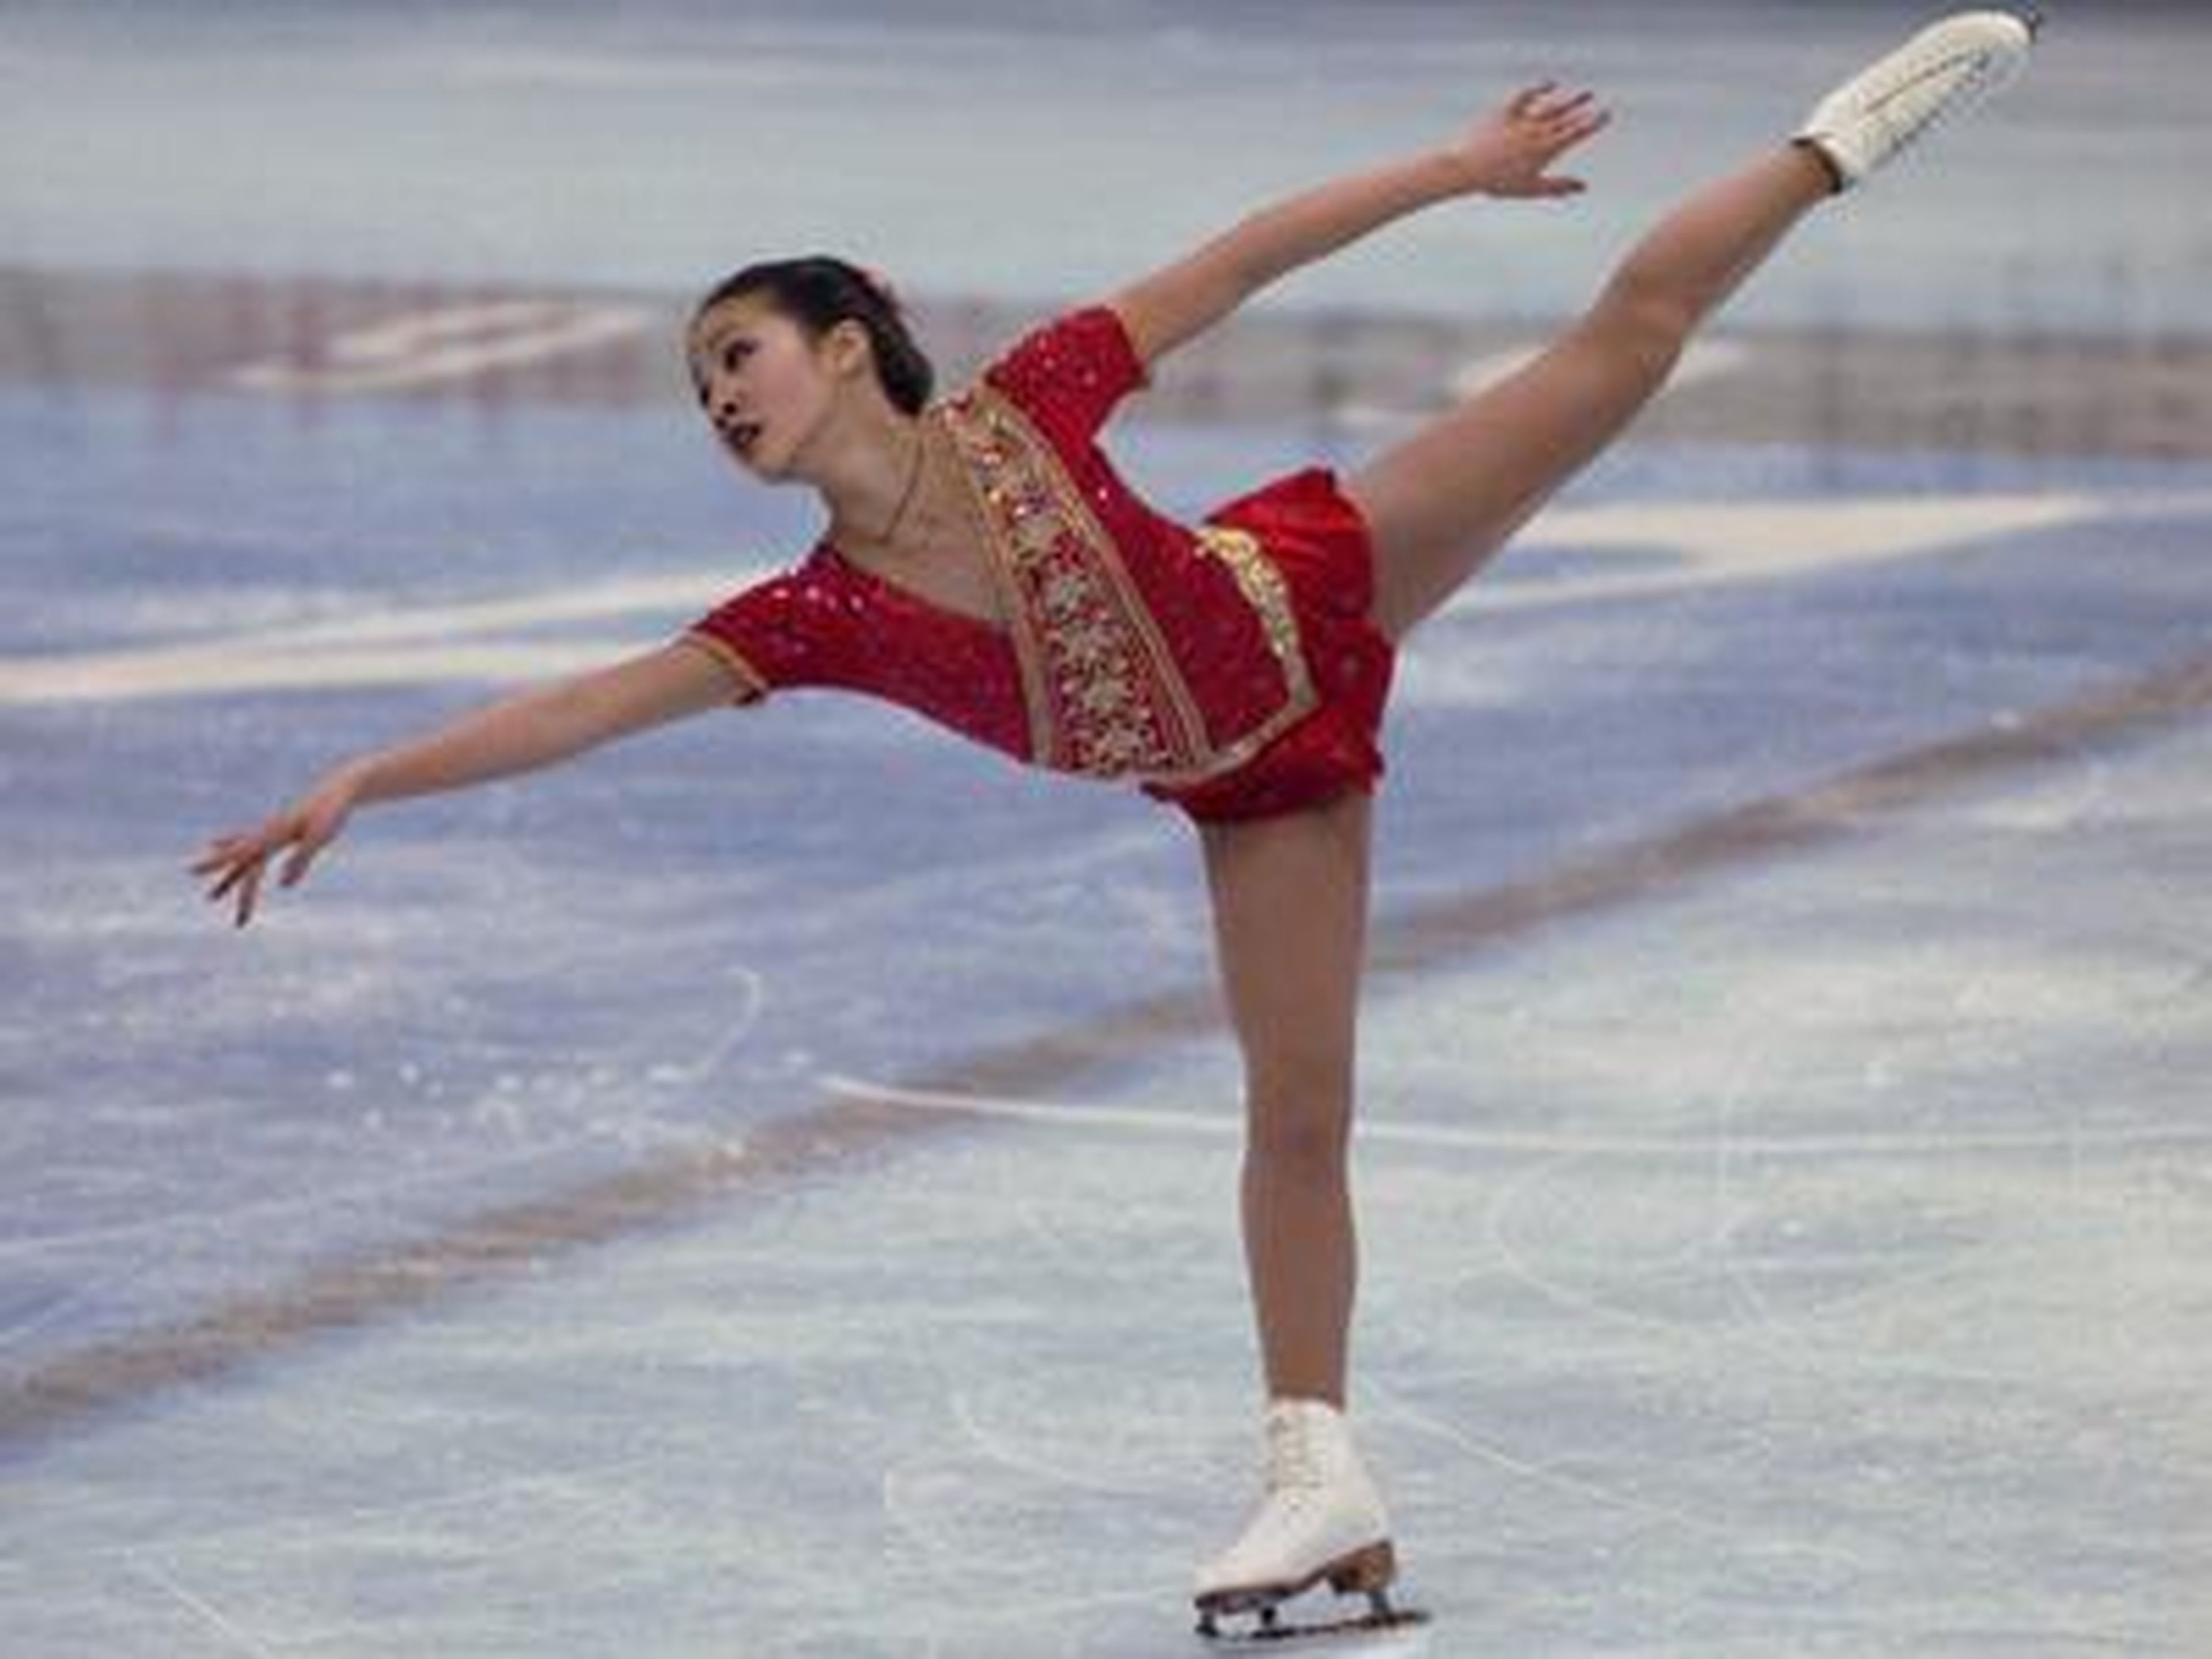 Michelle Kwan is the daughter of two Hong Kong immigrants and a five-time world champion figure skater.